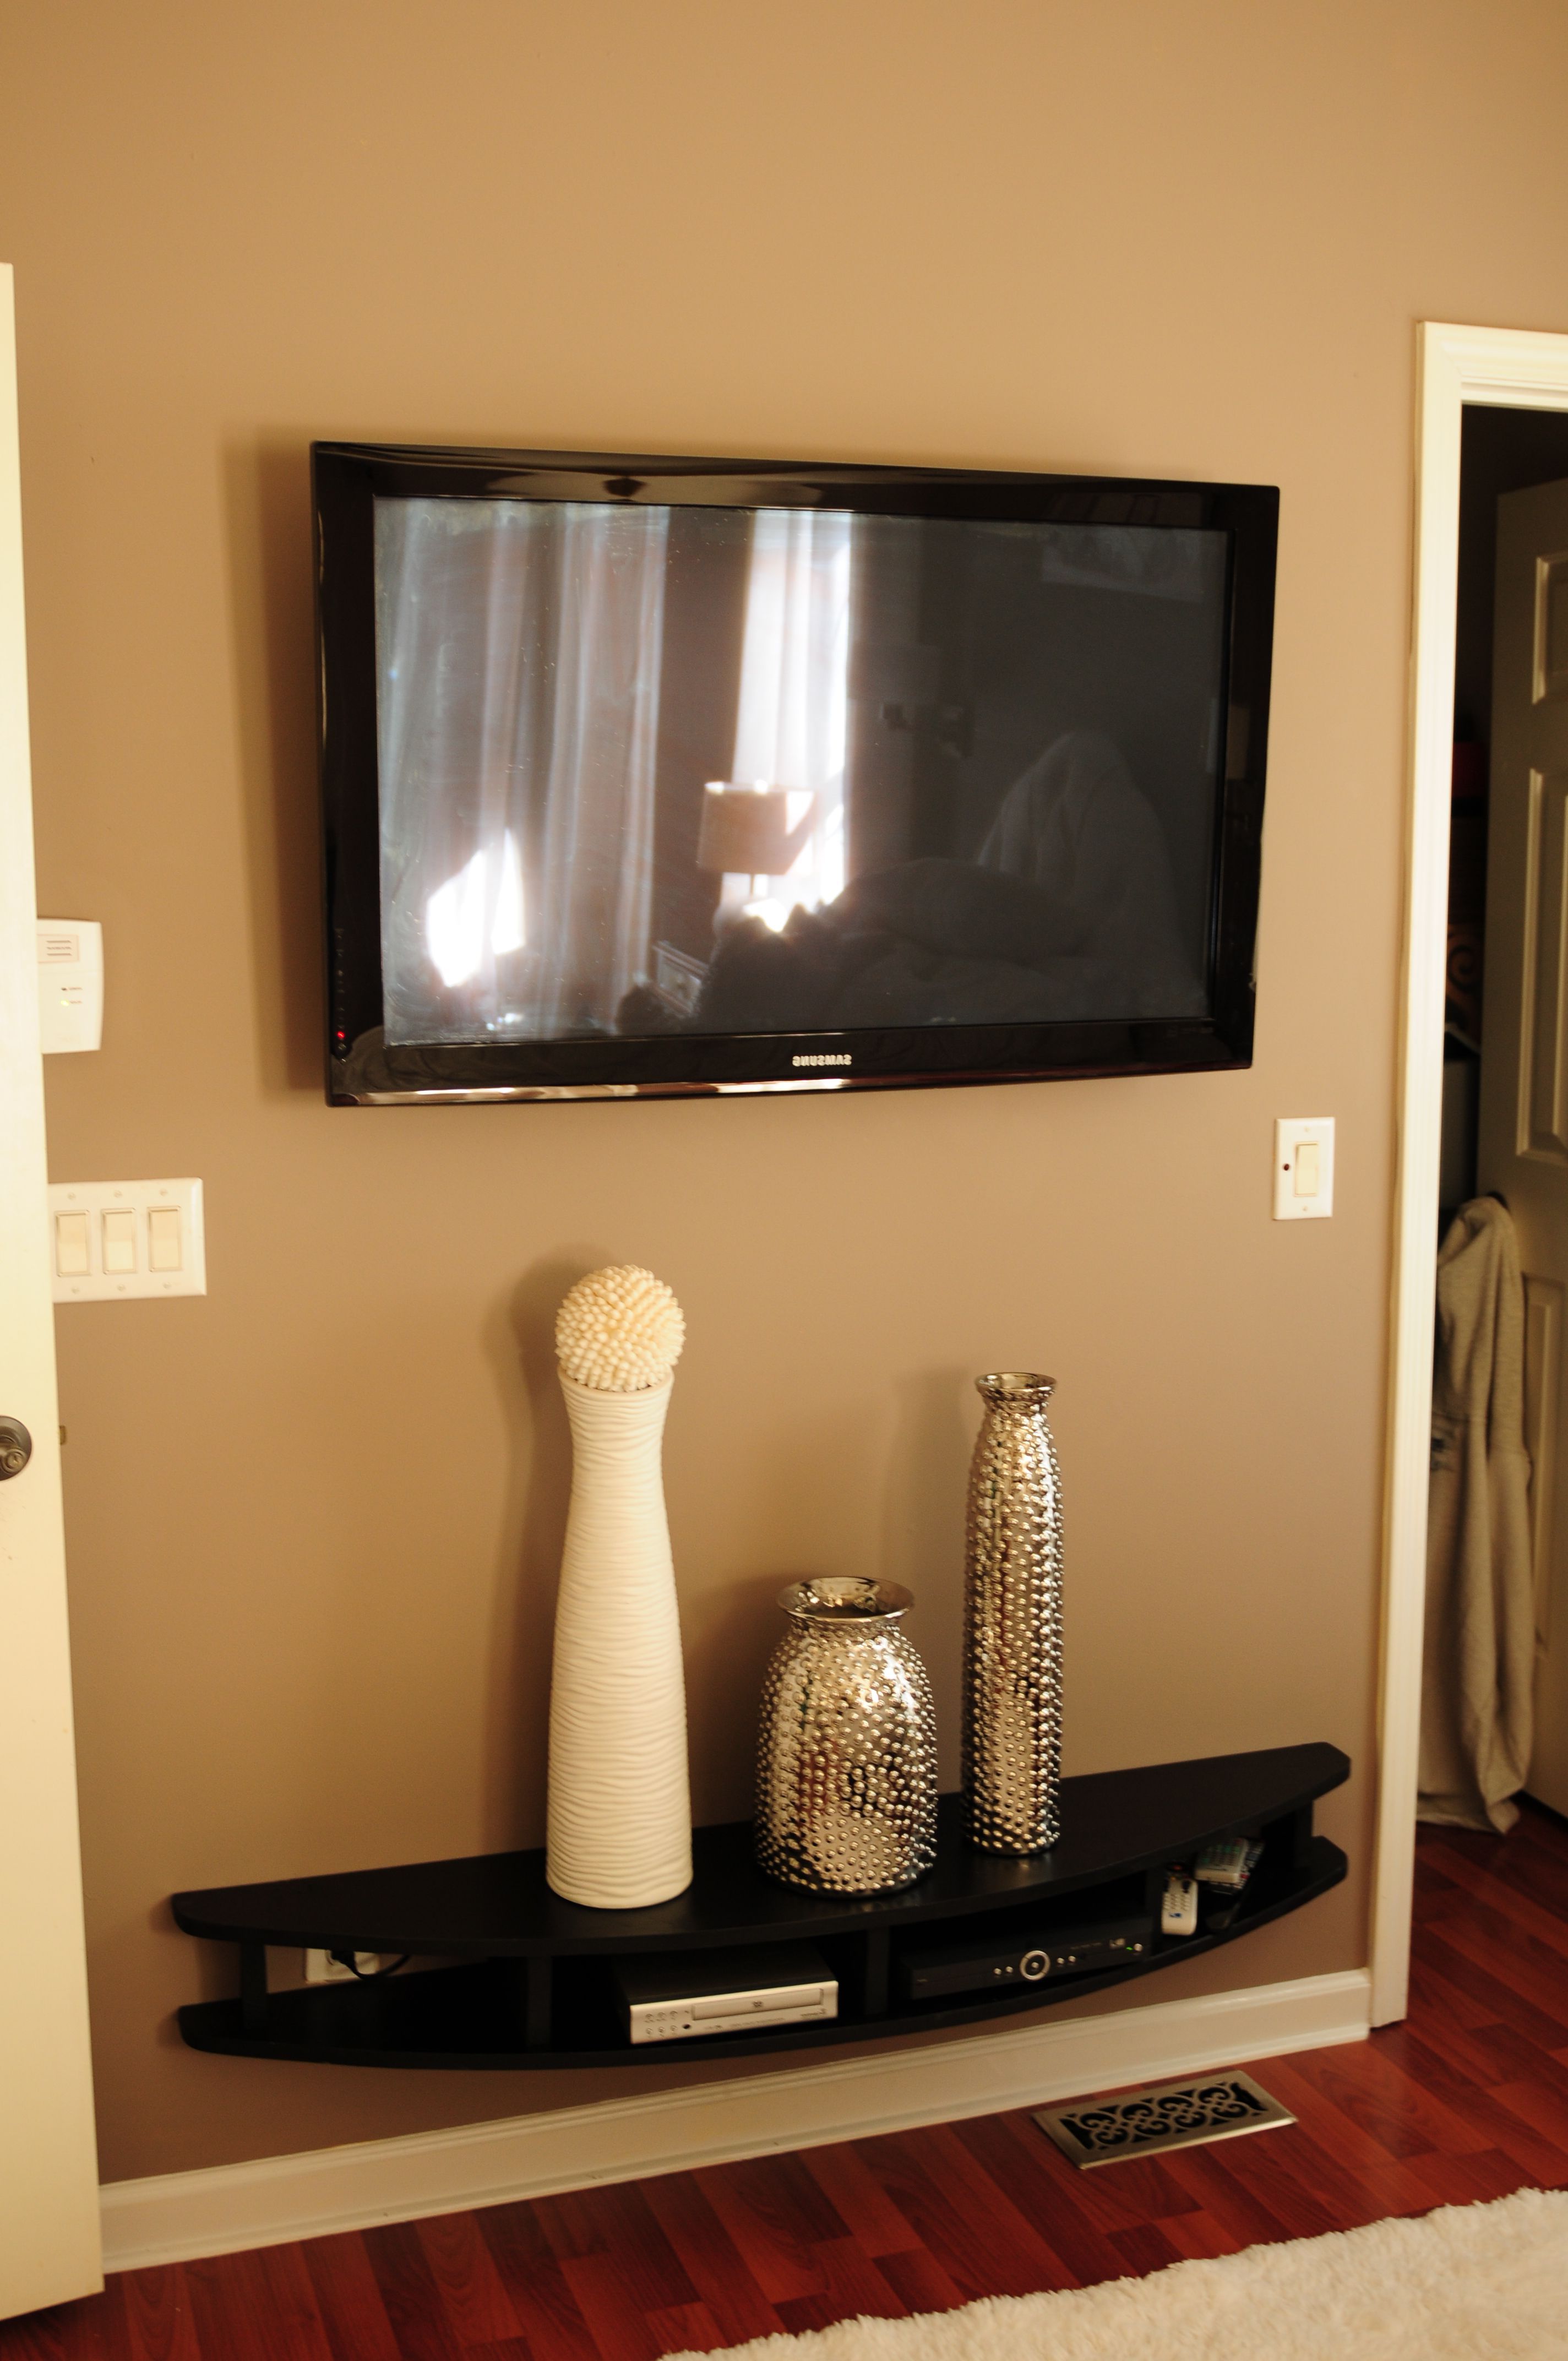 2017 Wall Mounted Tv Stands With Shelves In Hubby Built Modern Shelves To Wall Mount Under Tv (View 3 of 20)